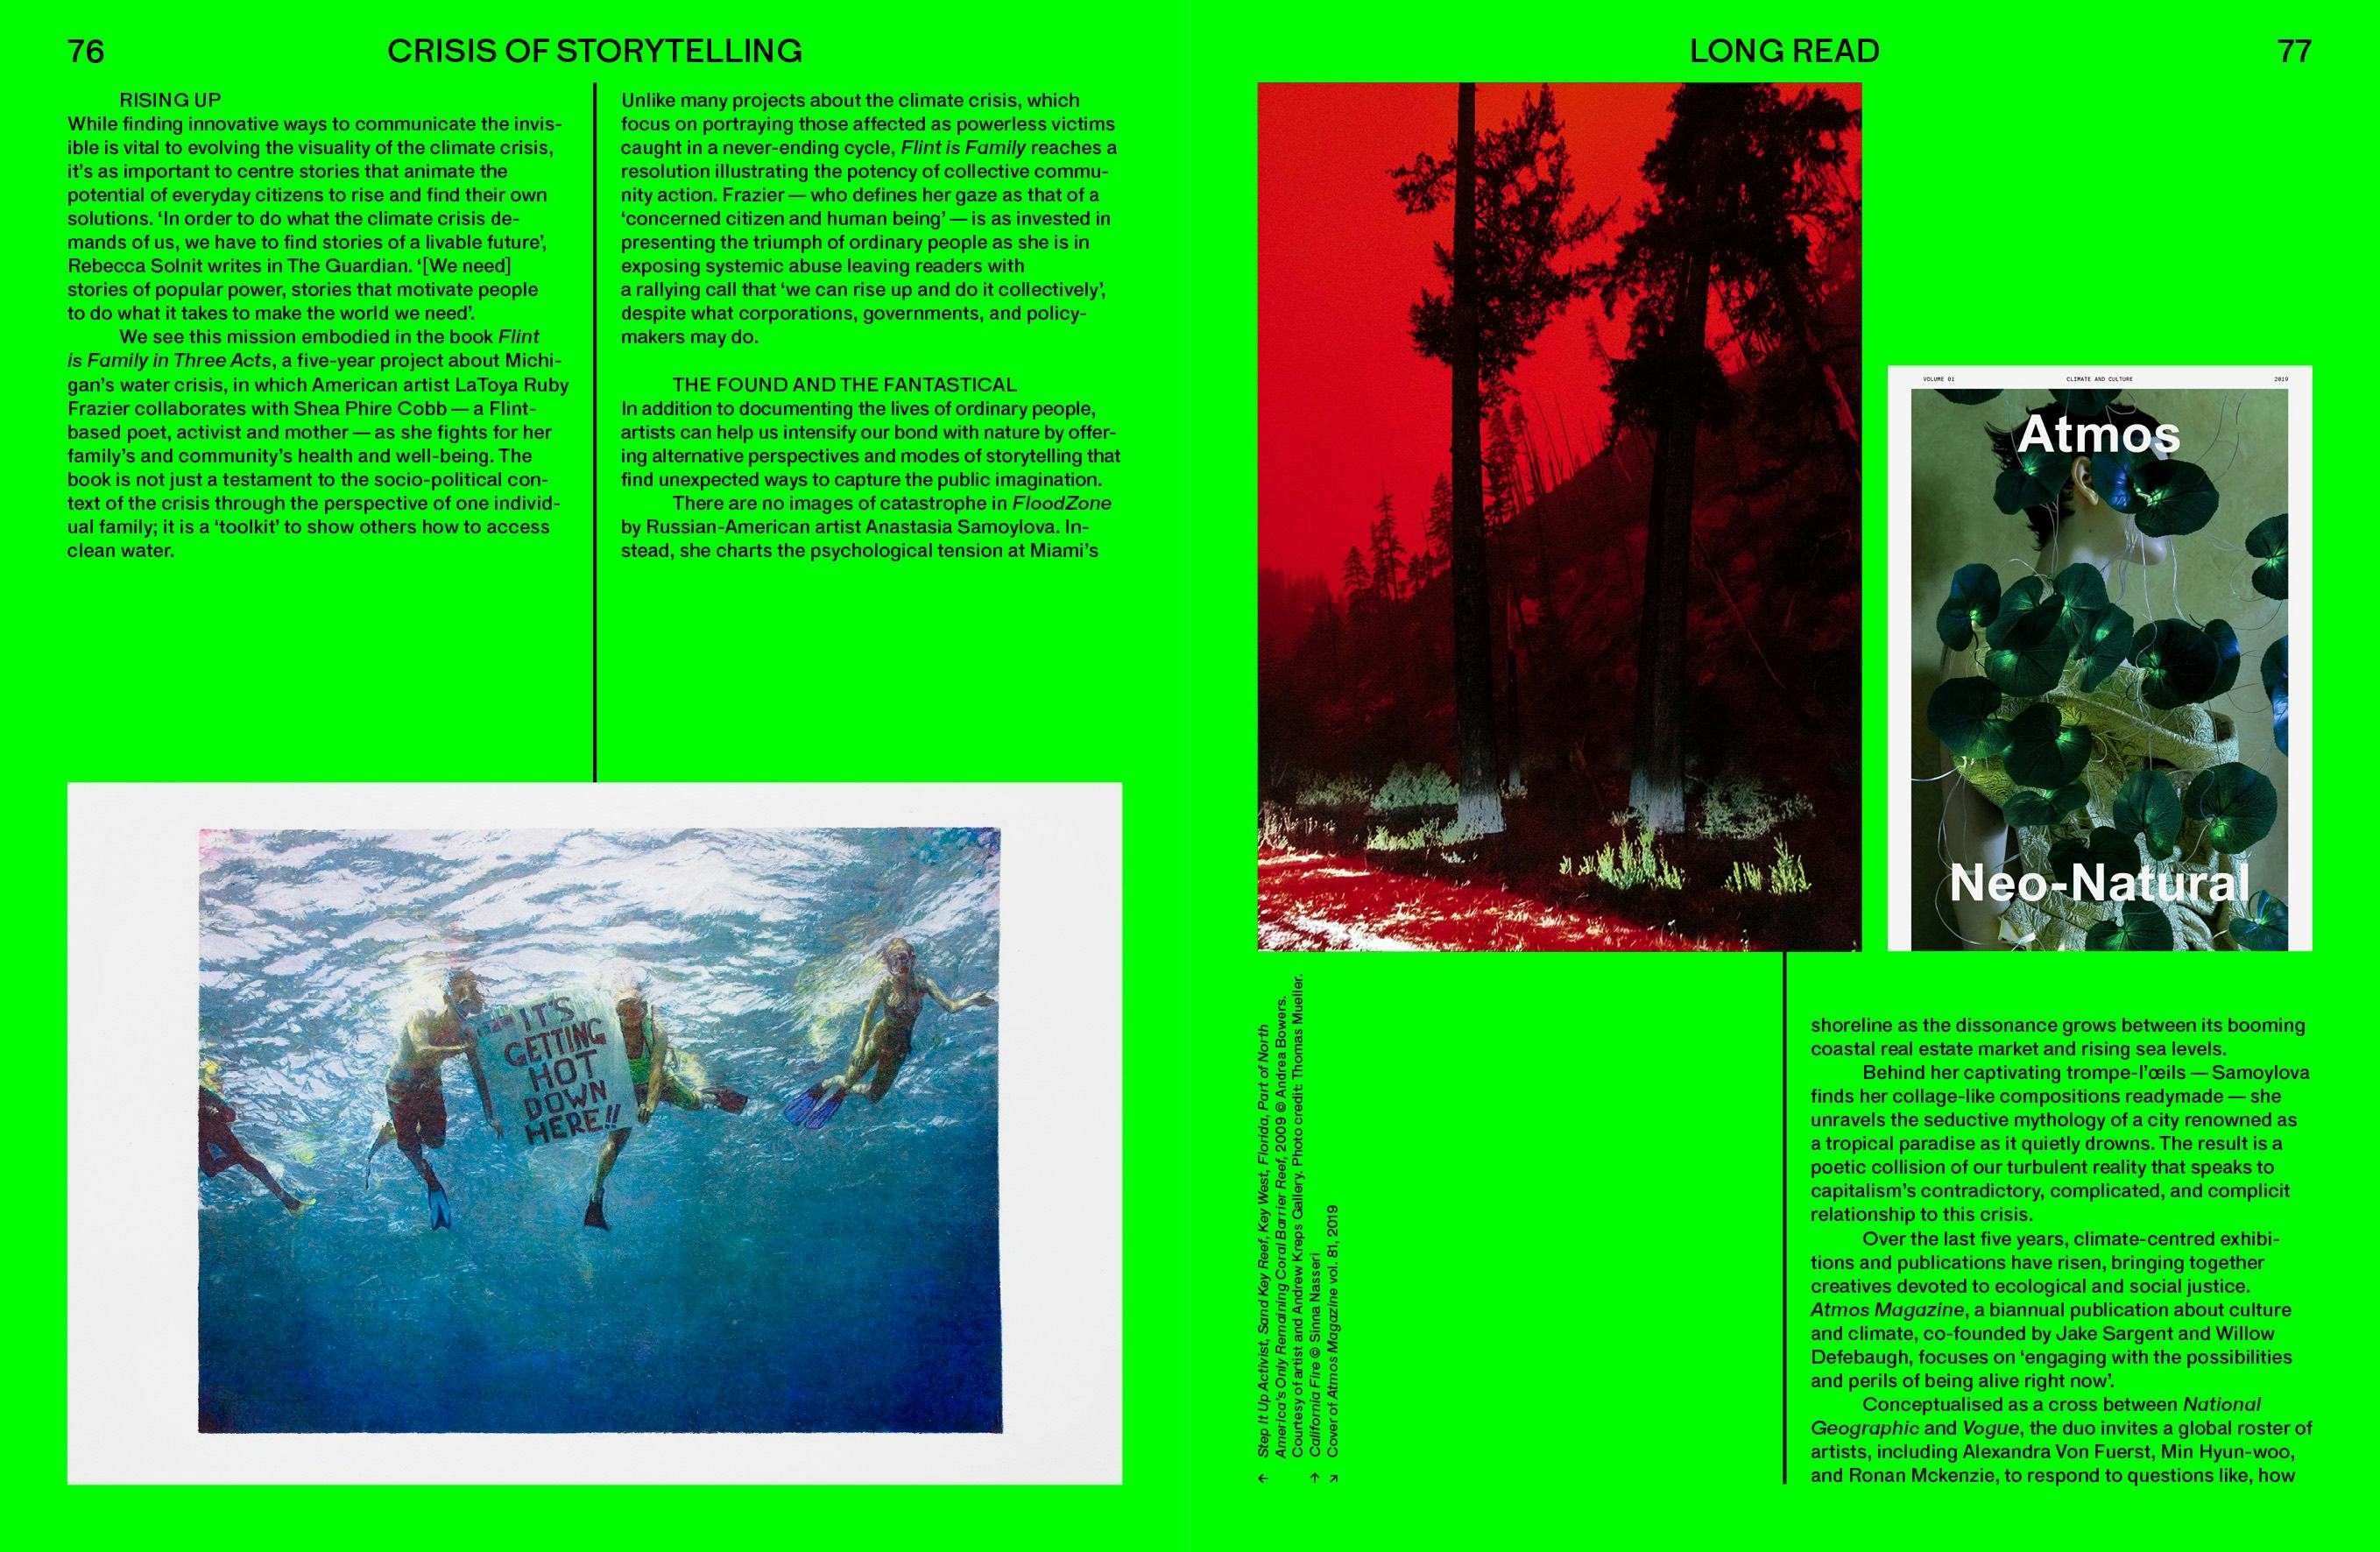 Spread from Foam Magazine #64: EXTREMES–The Environmental Issue, showing a long read by Gem Fletcher